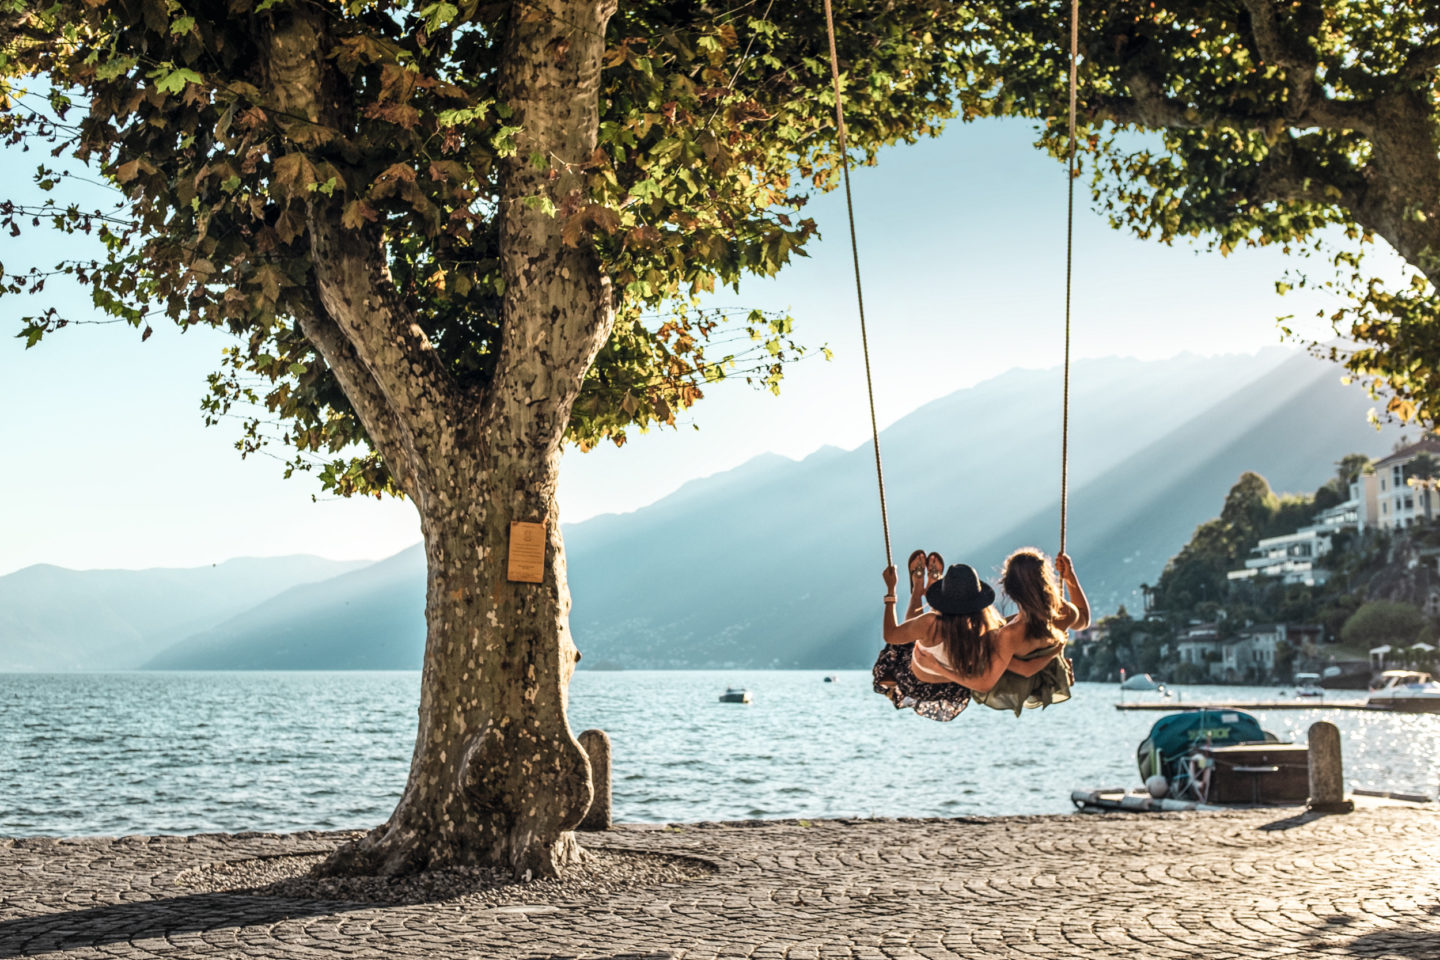 Two young women seated on a swing, joyfully swinging across the lake into the warm embrace of the sunset, creating a magical and carefree moment.